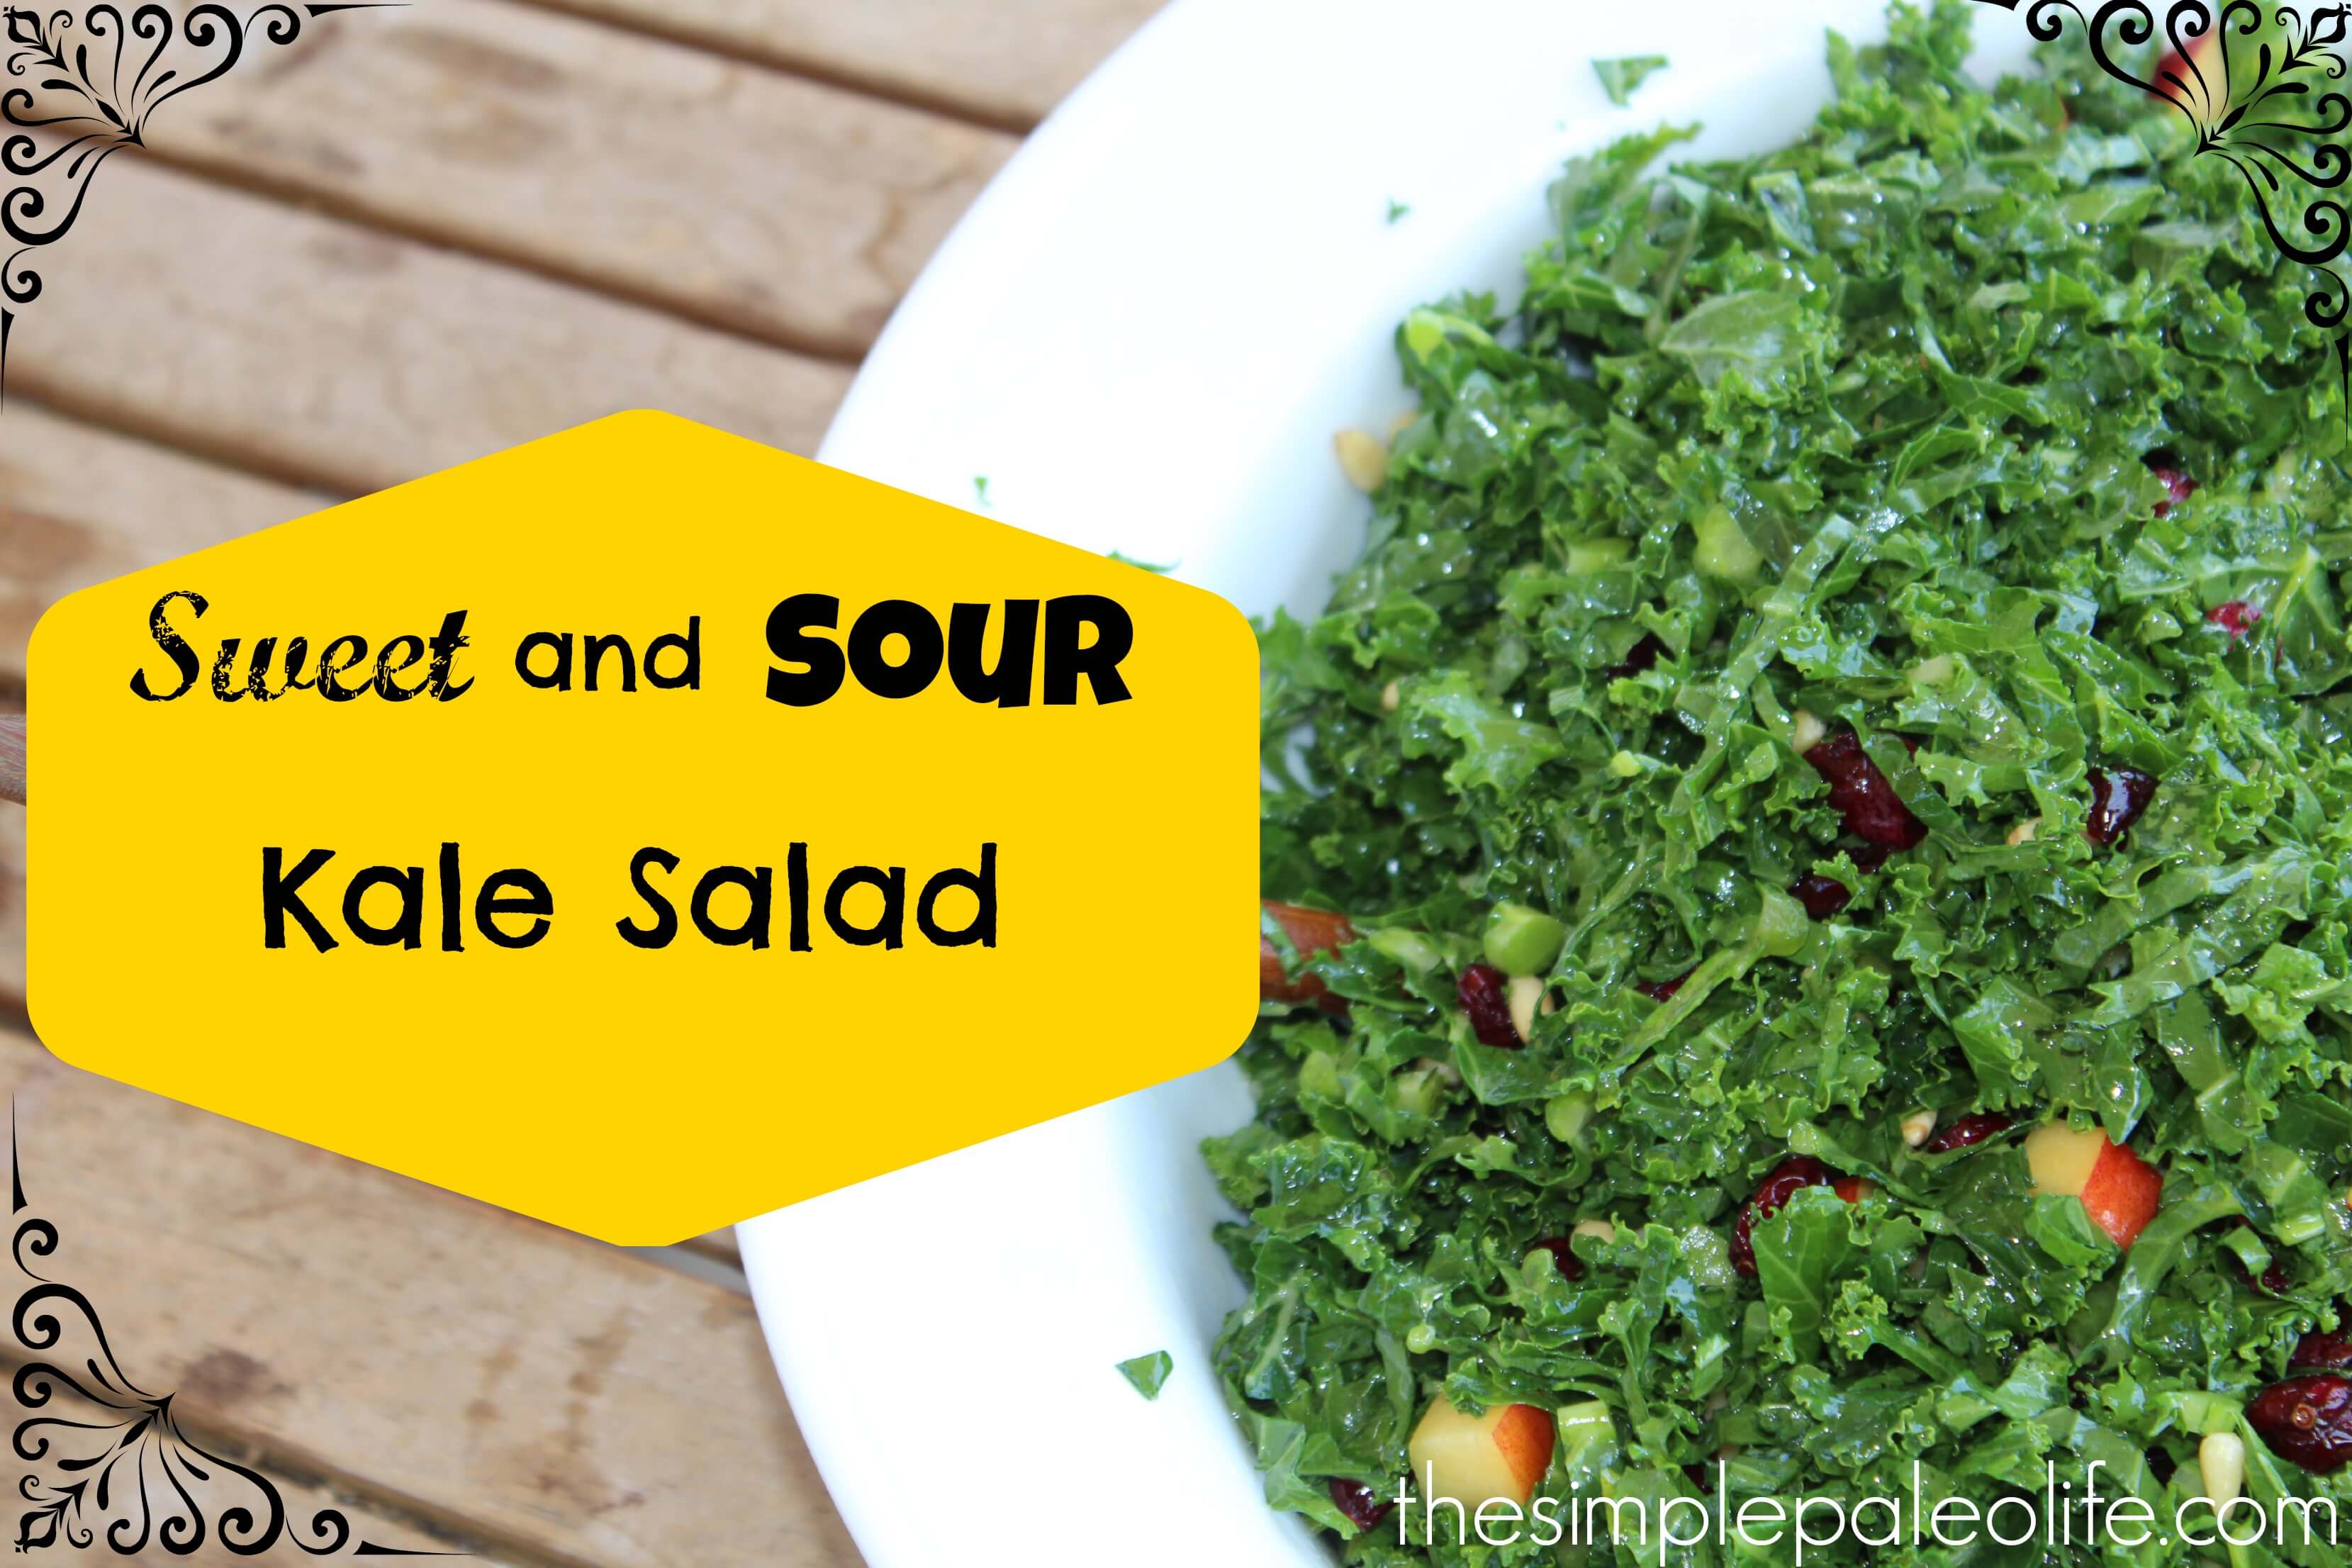 Sweet and Sour Kale Salad Recipe